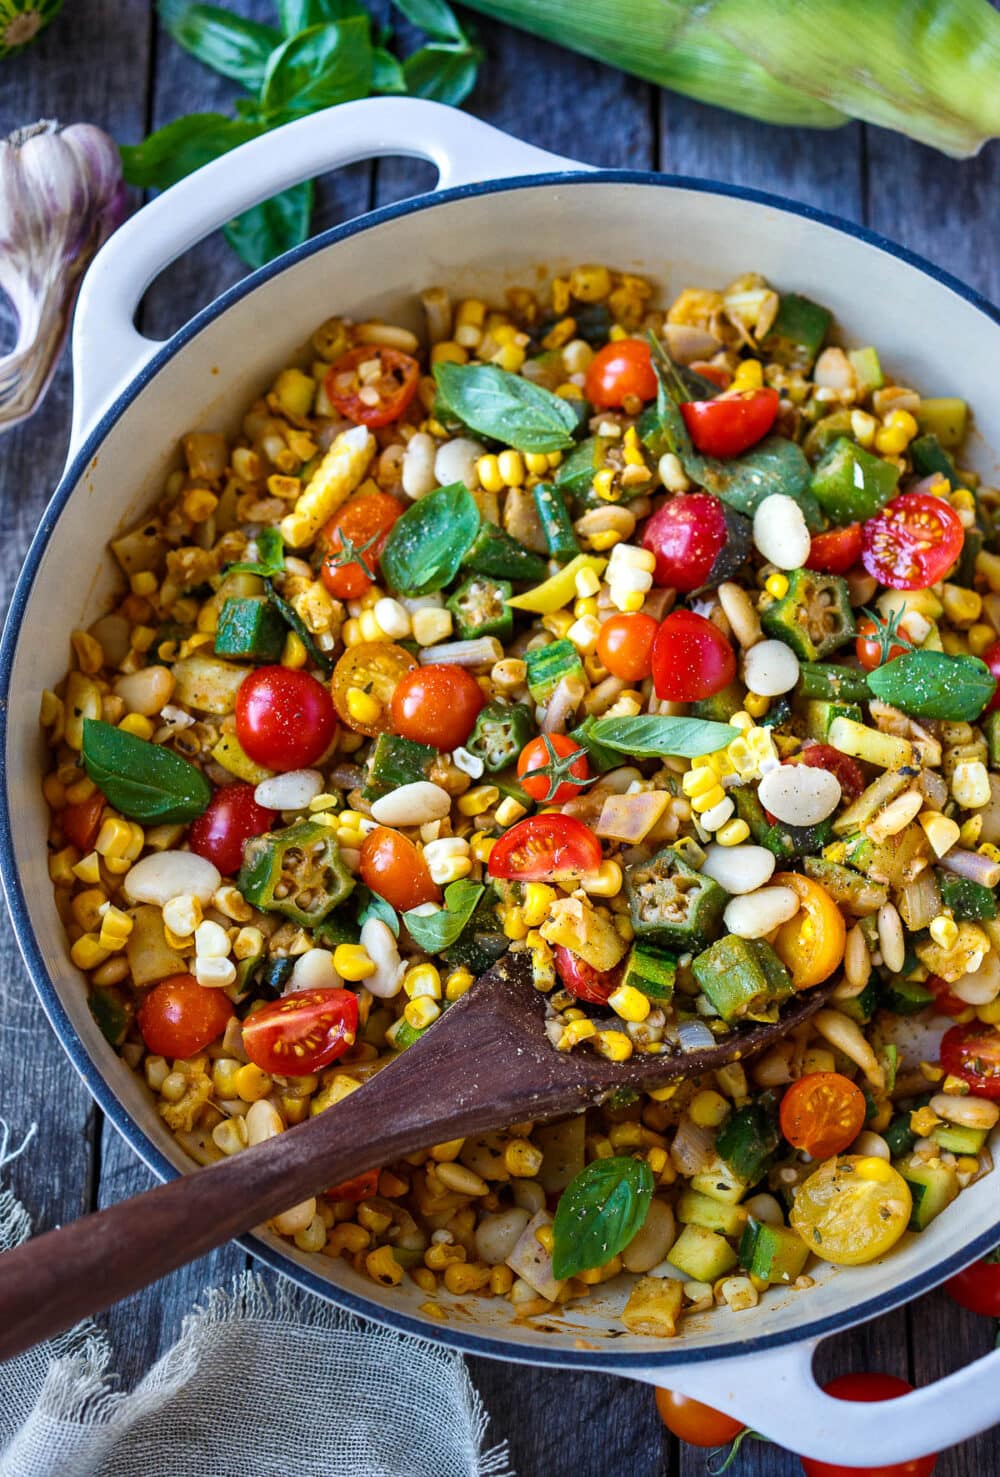 Harvest Succotash is abundant with fresh summer veggies & simple, clean flavors.  A delicious healthy side dish to pair with your choice of protein for a healthy delicious meal. Vegan and Gluten-free.